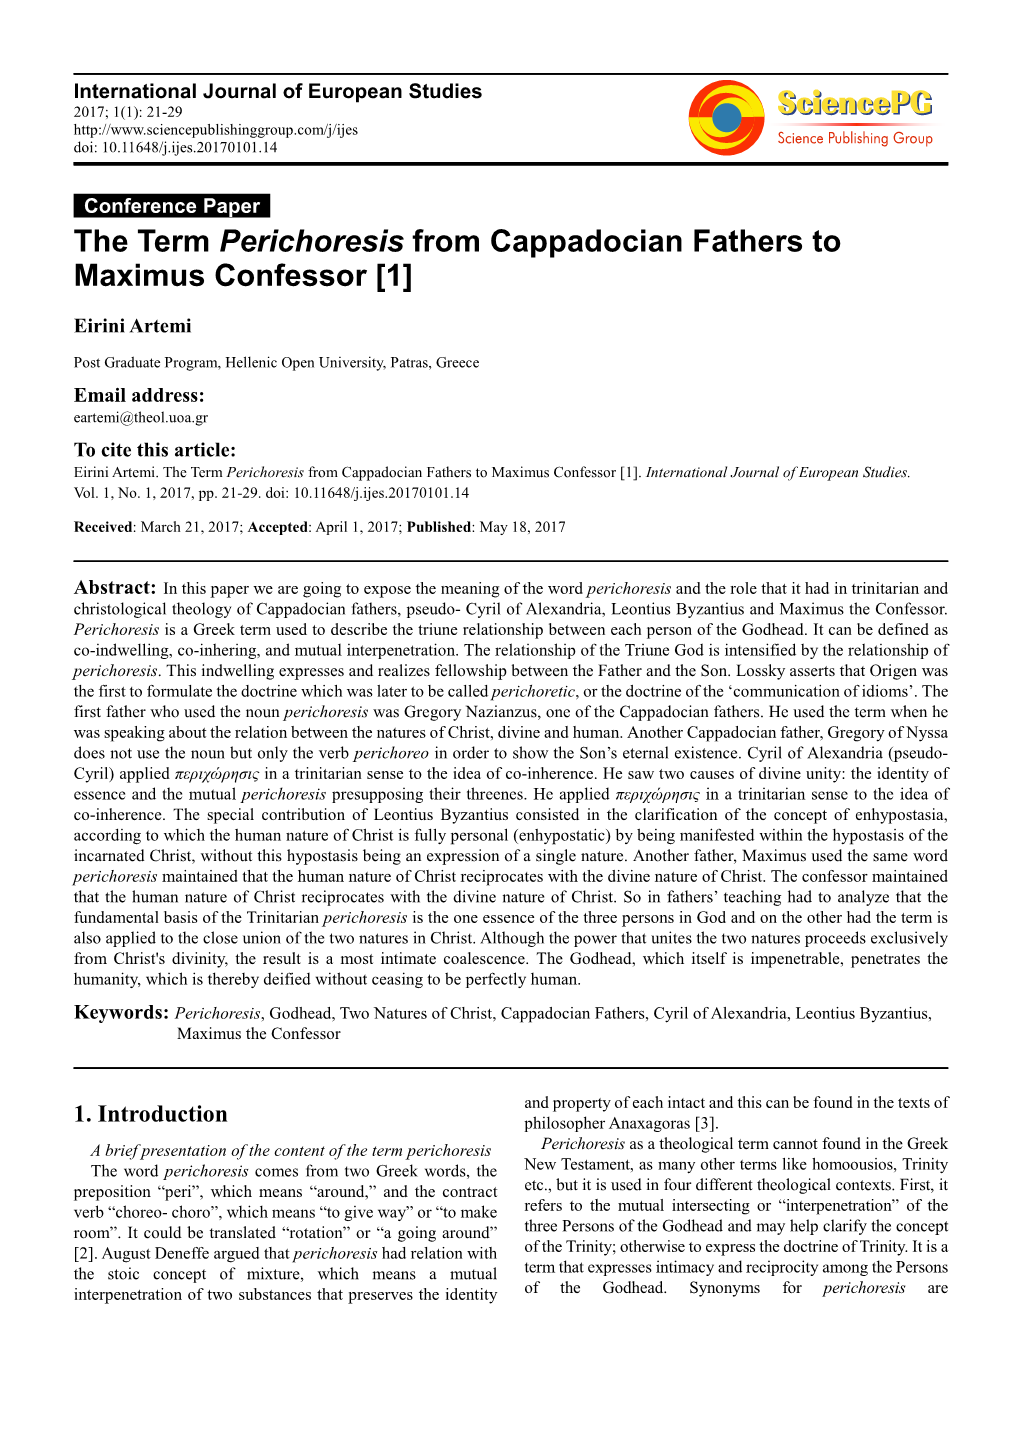 The Term Perichoresis from Cappadocian Fathers to Maximus Confessor [1]